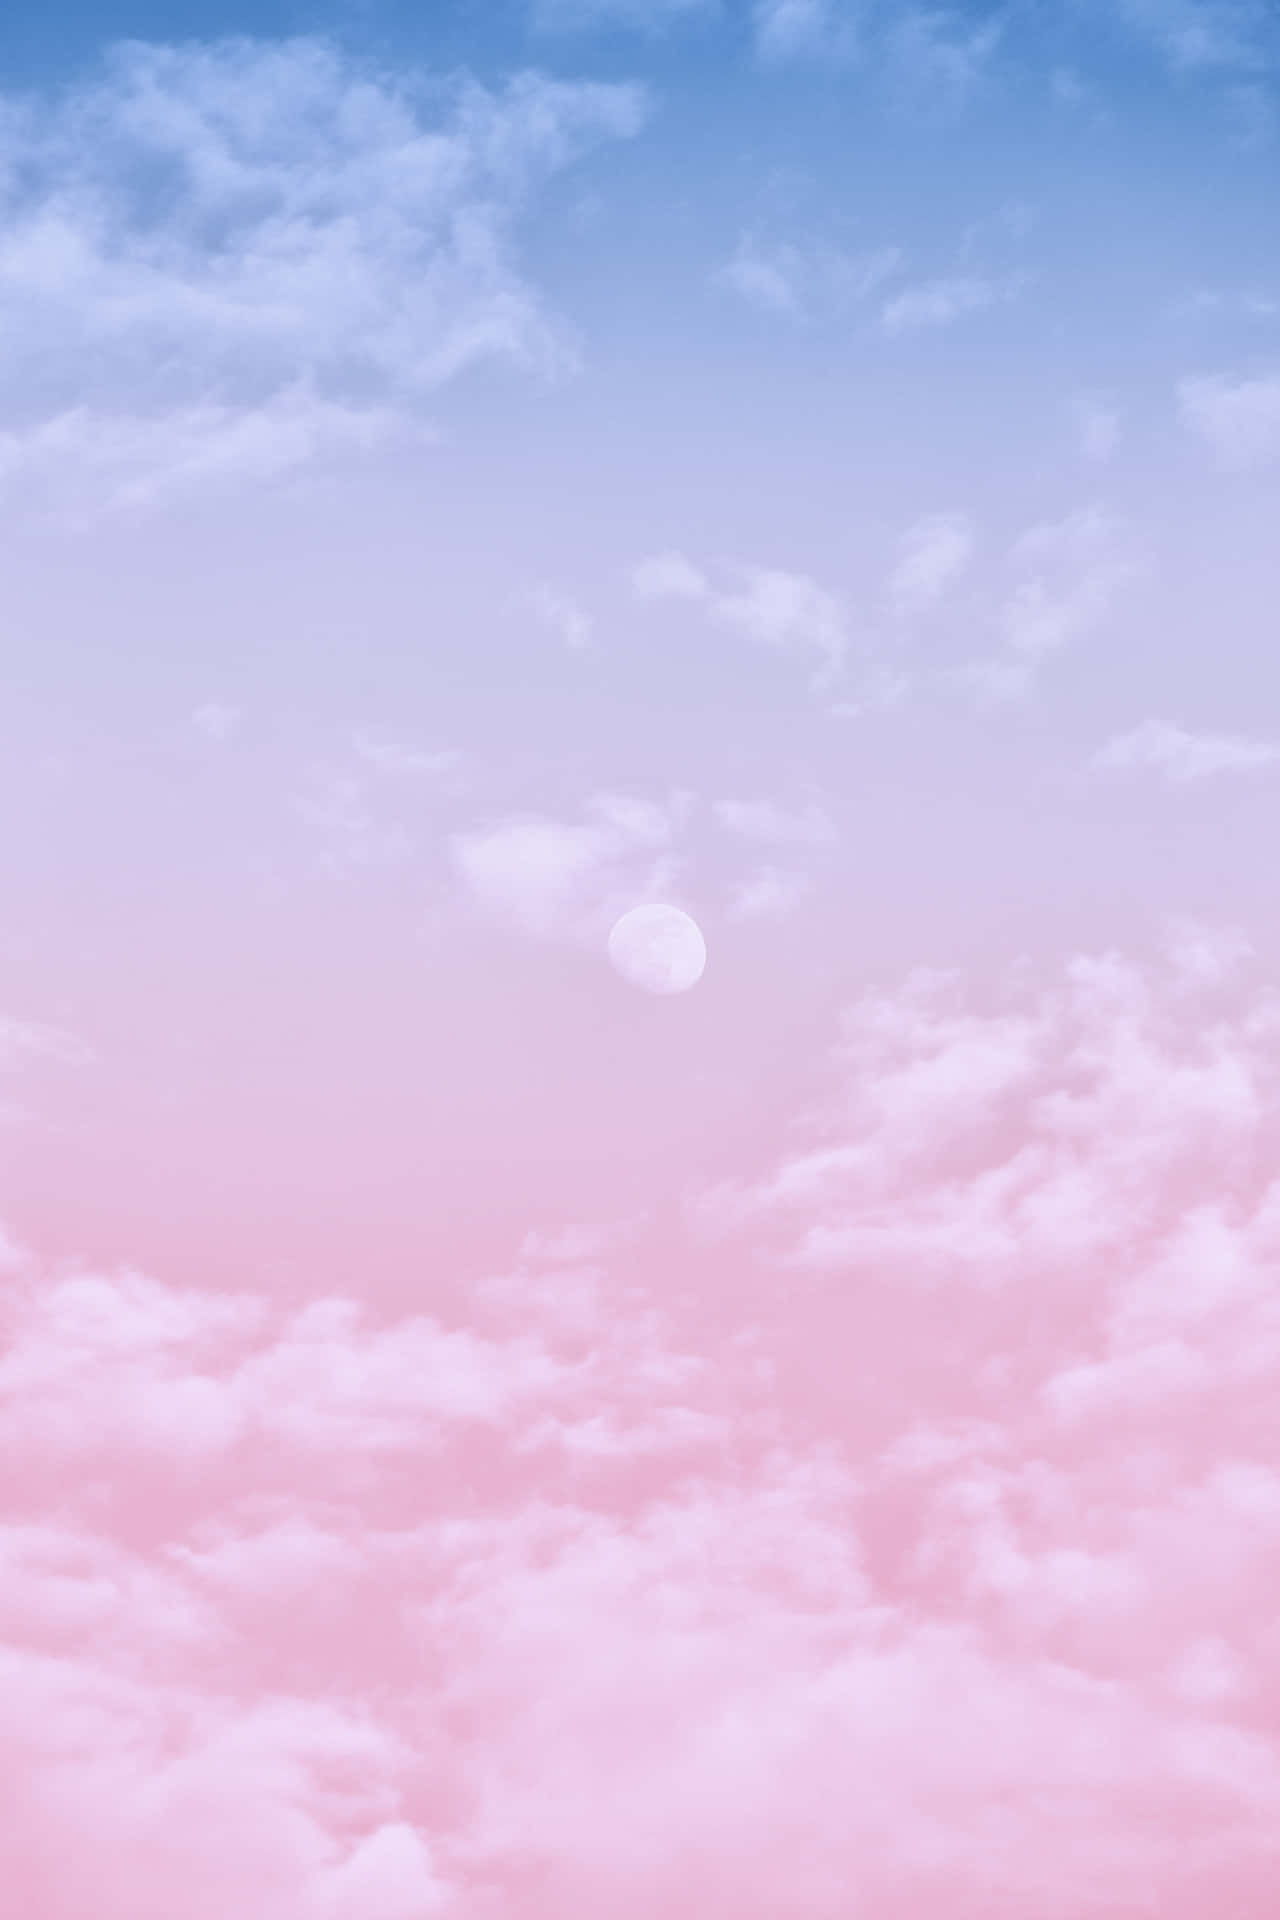 Pink And Blue Clouds With A Moon In The Sky Wallpaper